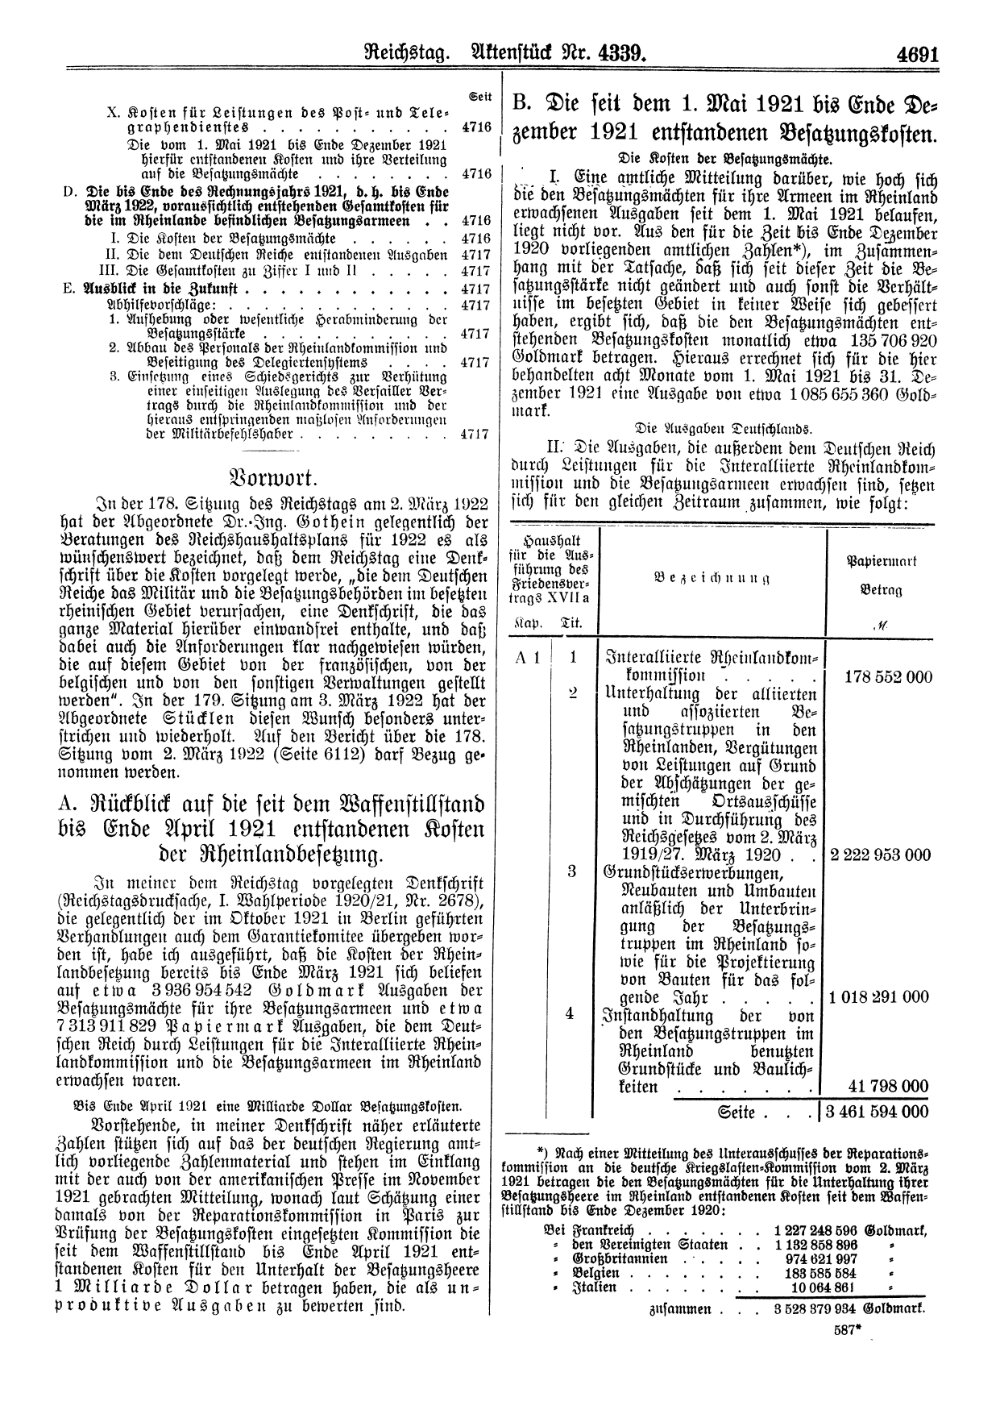 Scan of page 4691